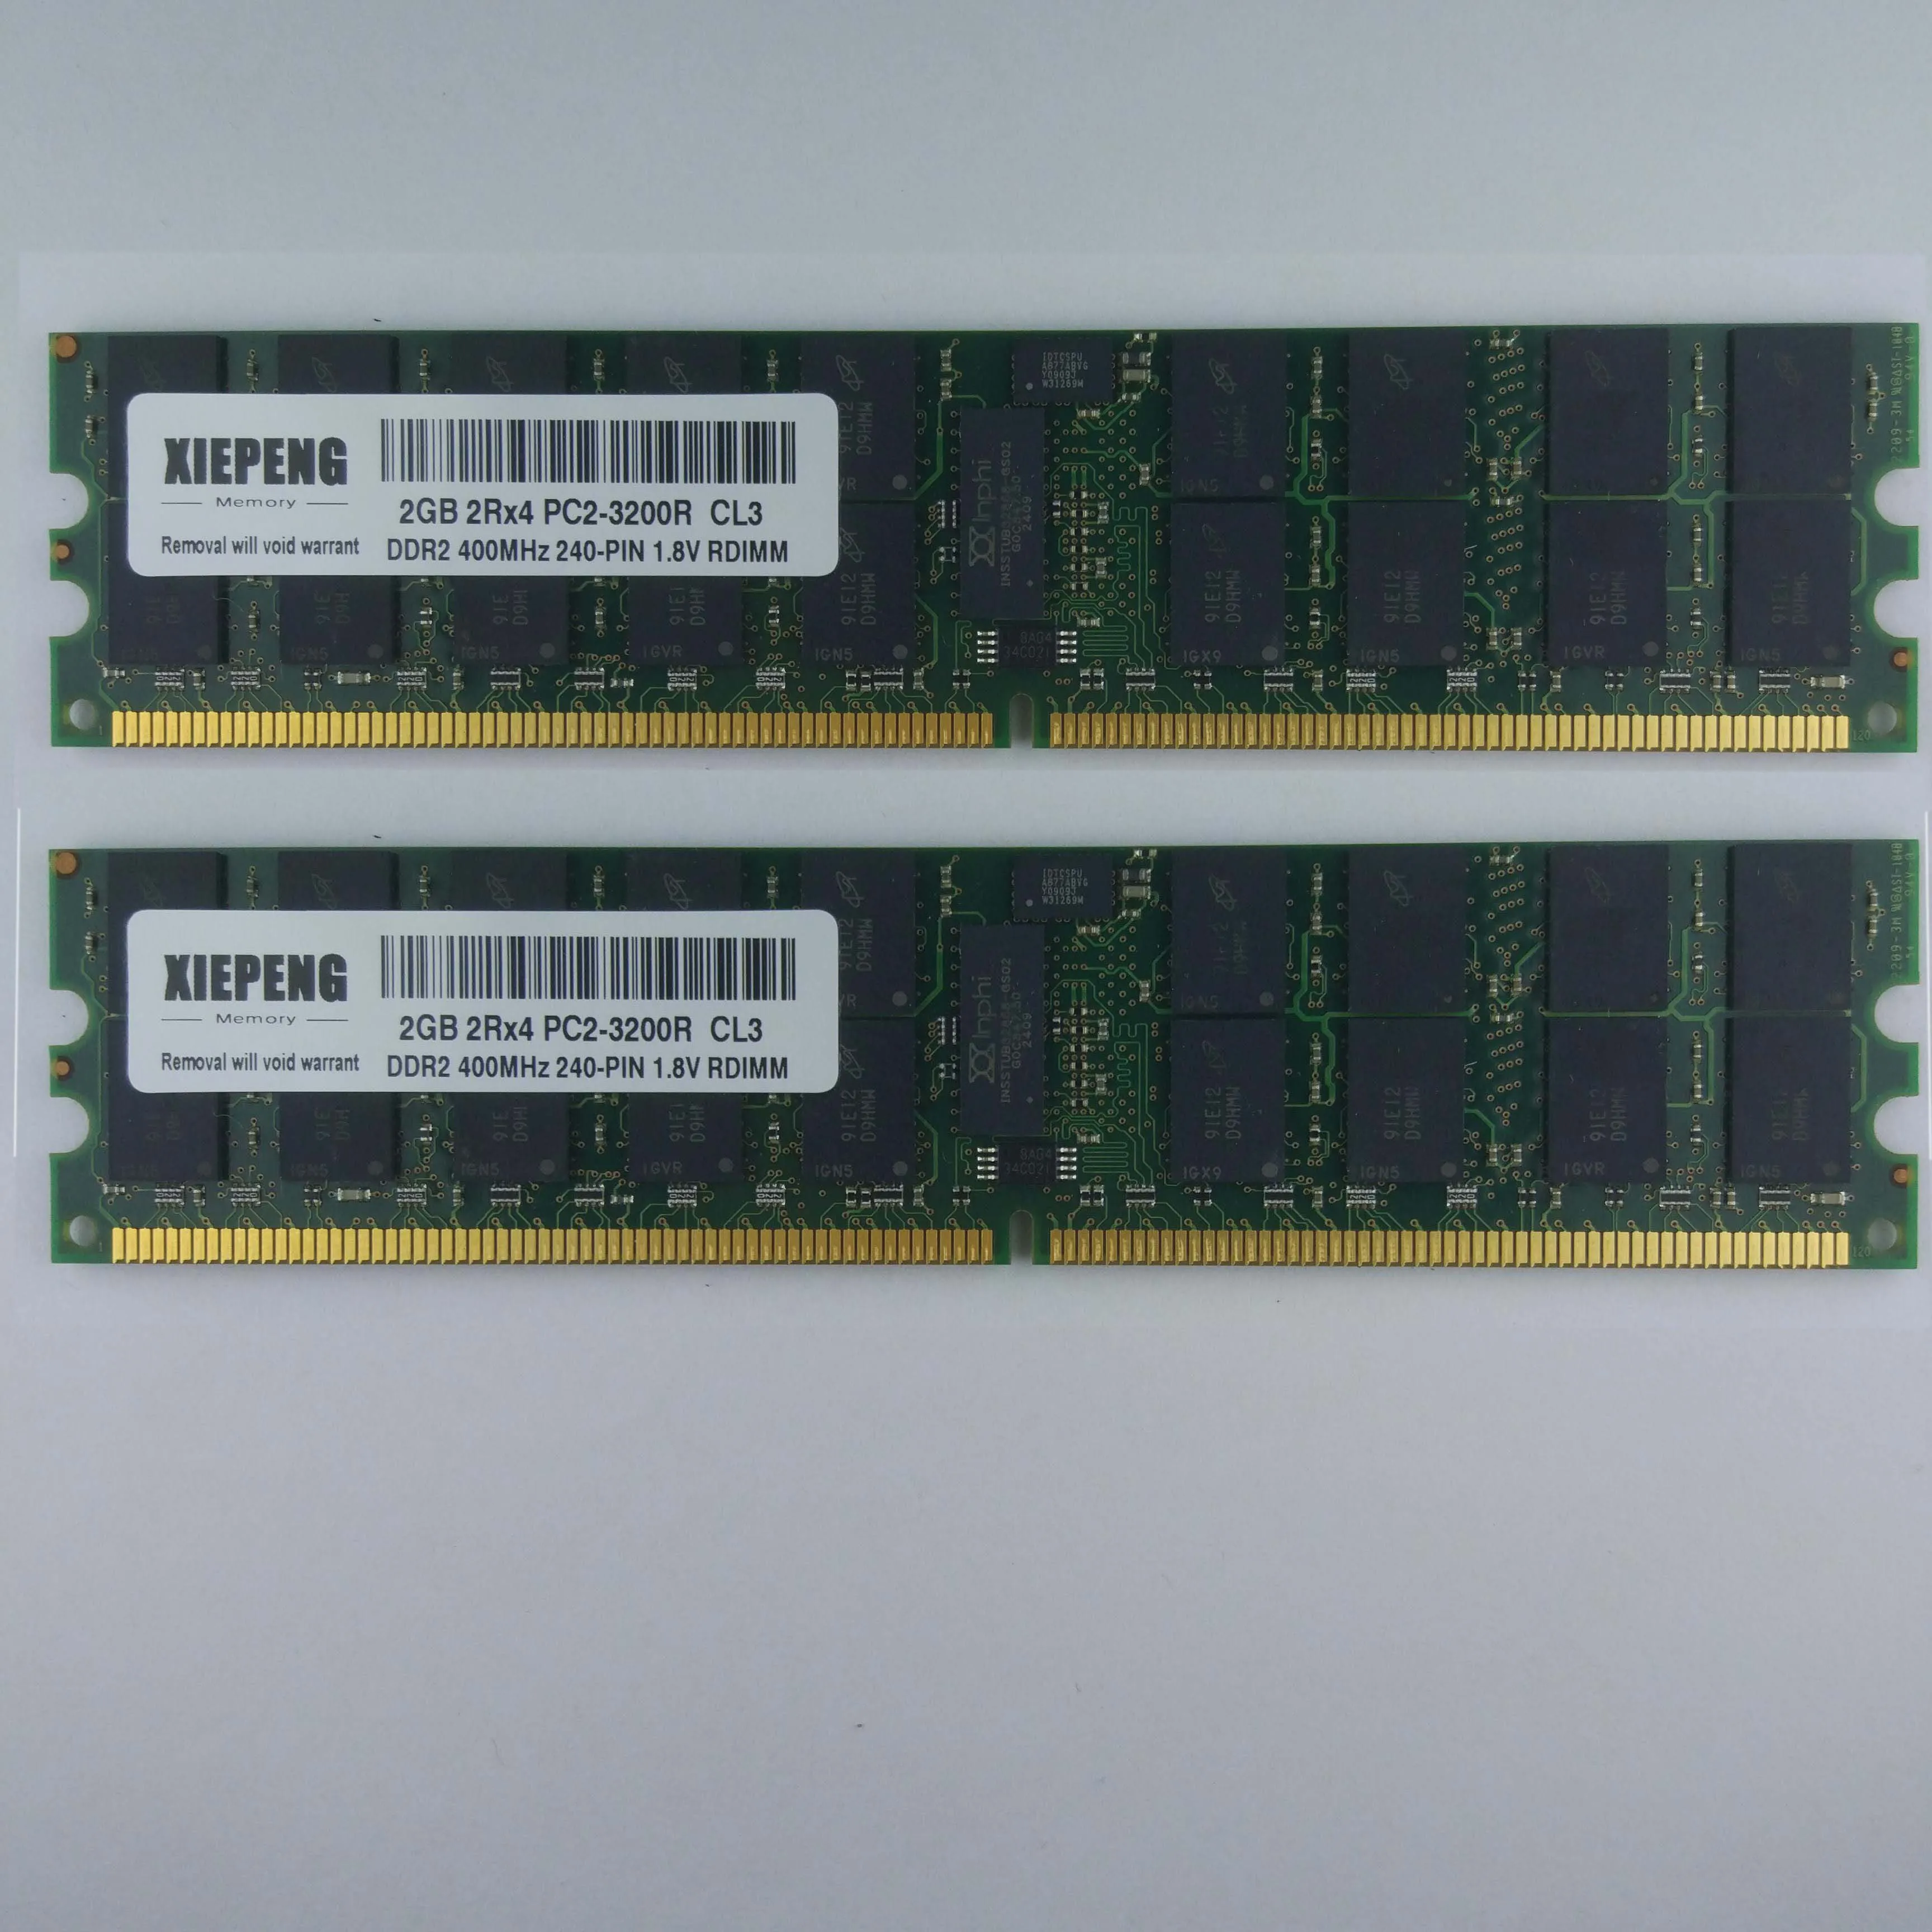 OFFTEK 2GB Kit DDR2-5300 - Non-ECC Server Memory/Workstation Memory Replacement RAM Memory for HP-Compaq Workstation xw4300 2x1GB Module 